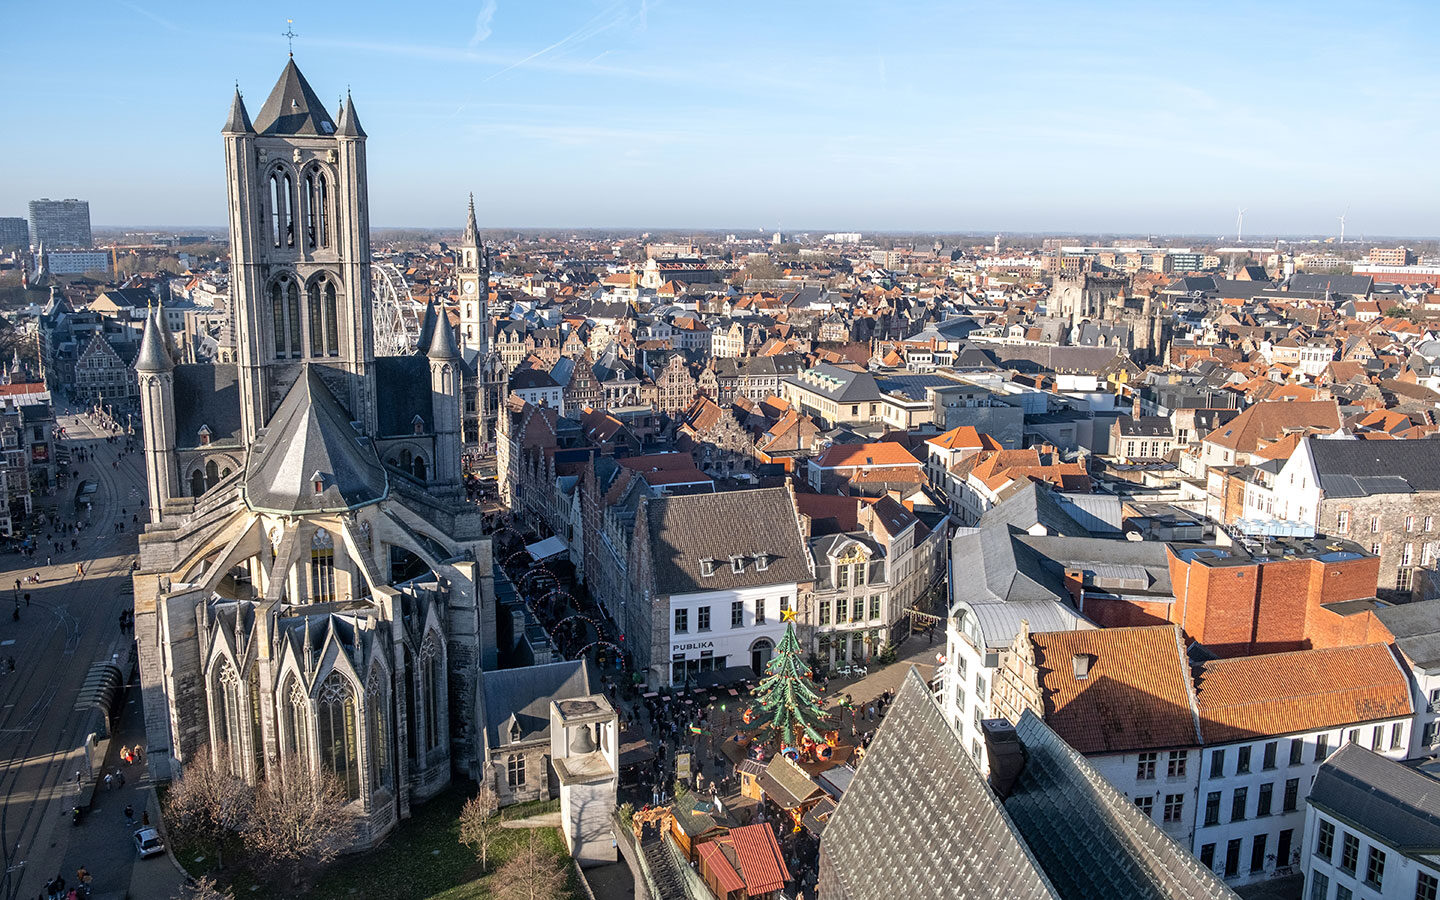 Views from top of Ghent's Belfry tower